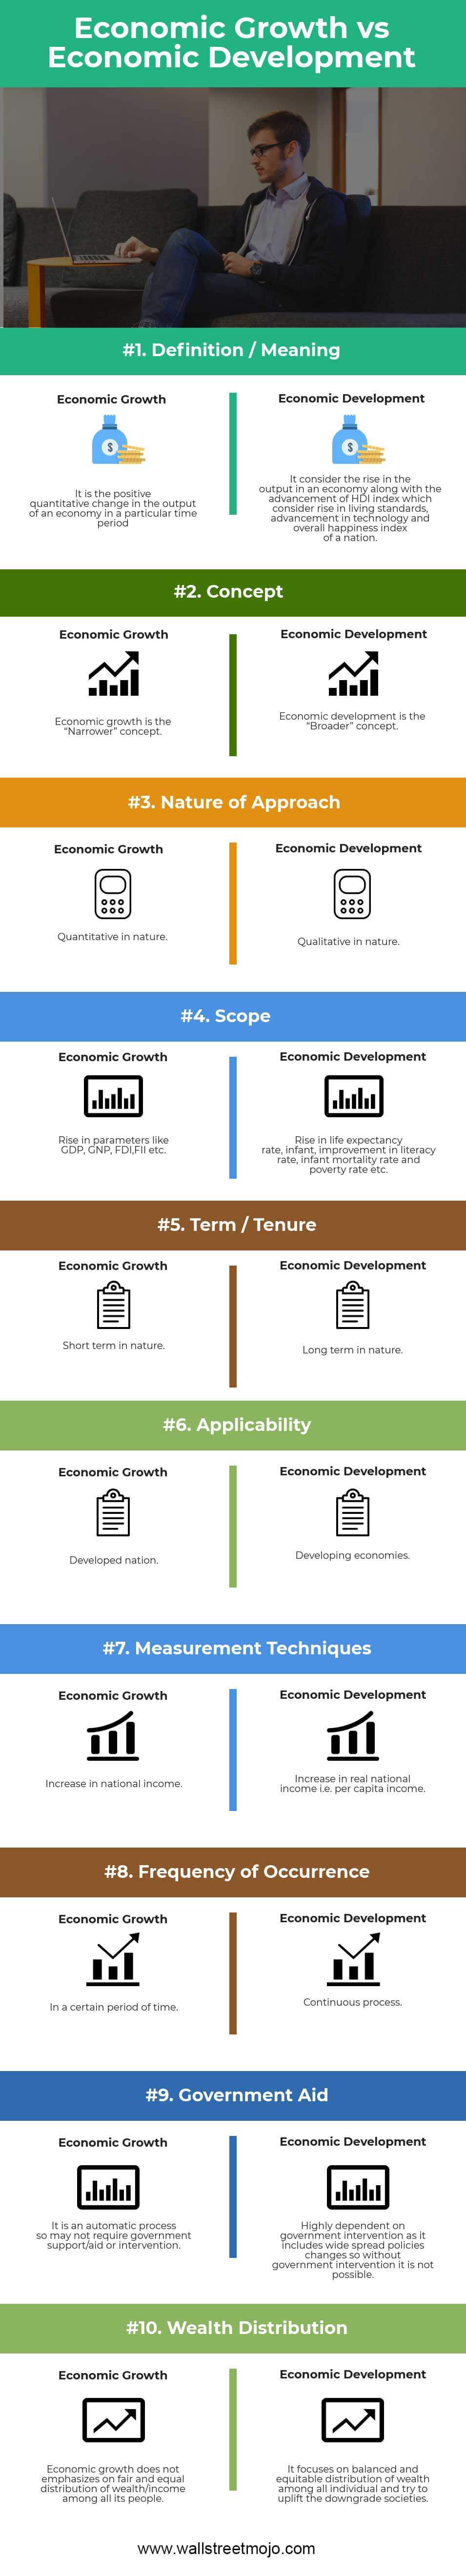 top differences between economic growth and economic development